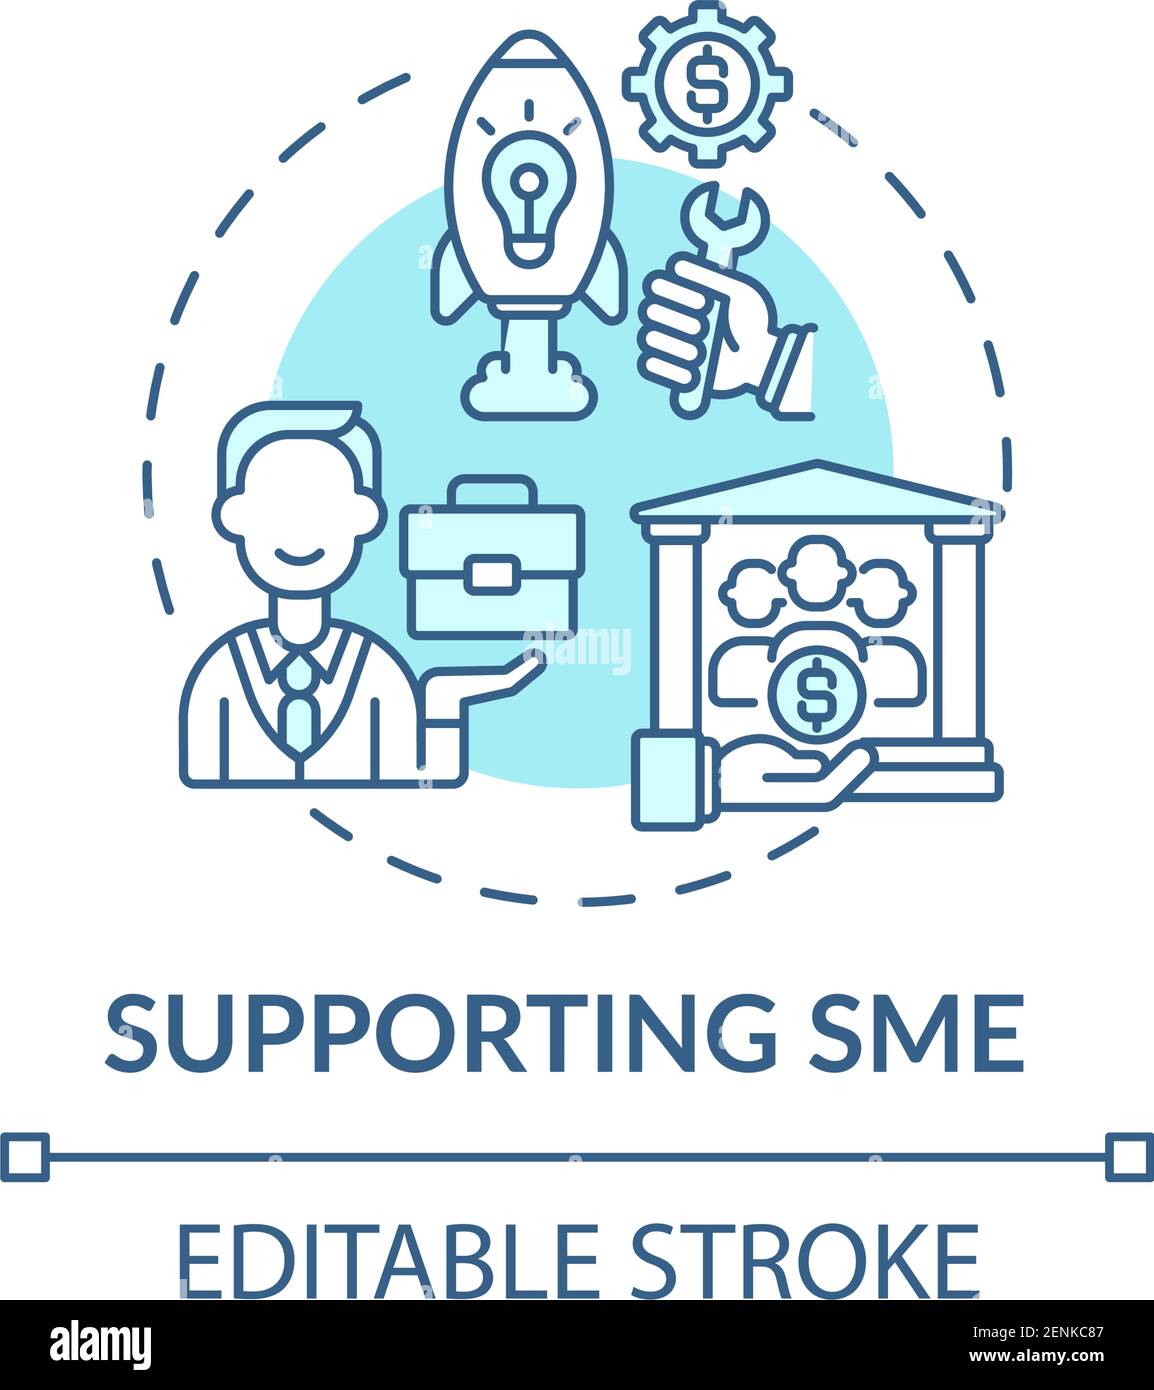 Supporting SME concept icon Stock Vector